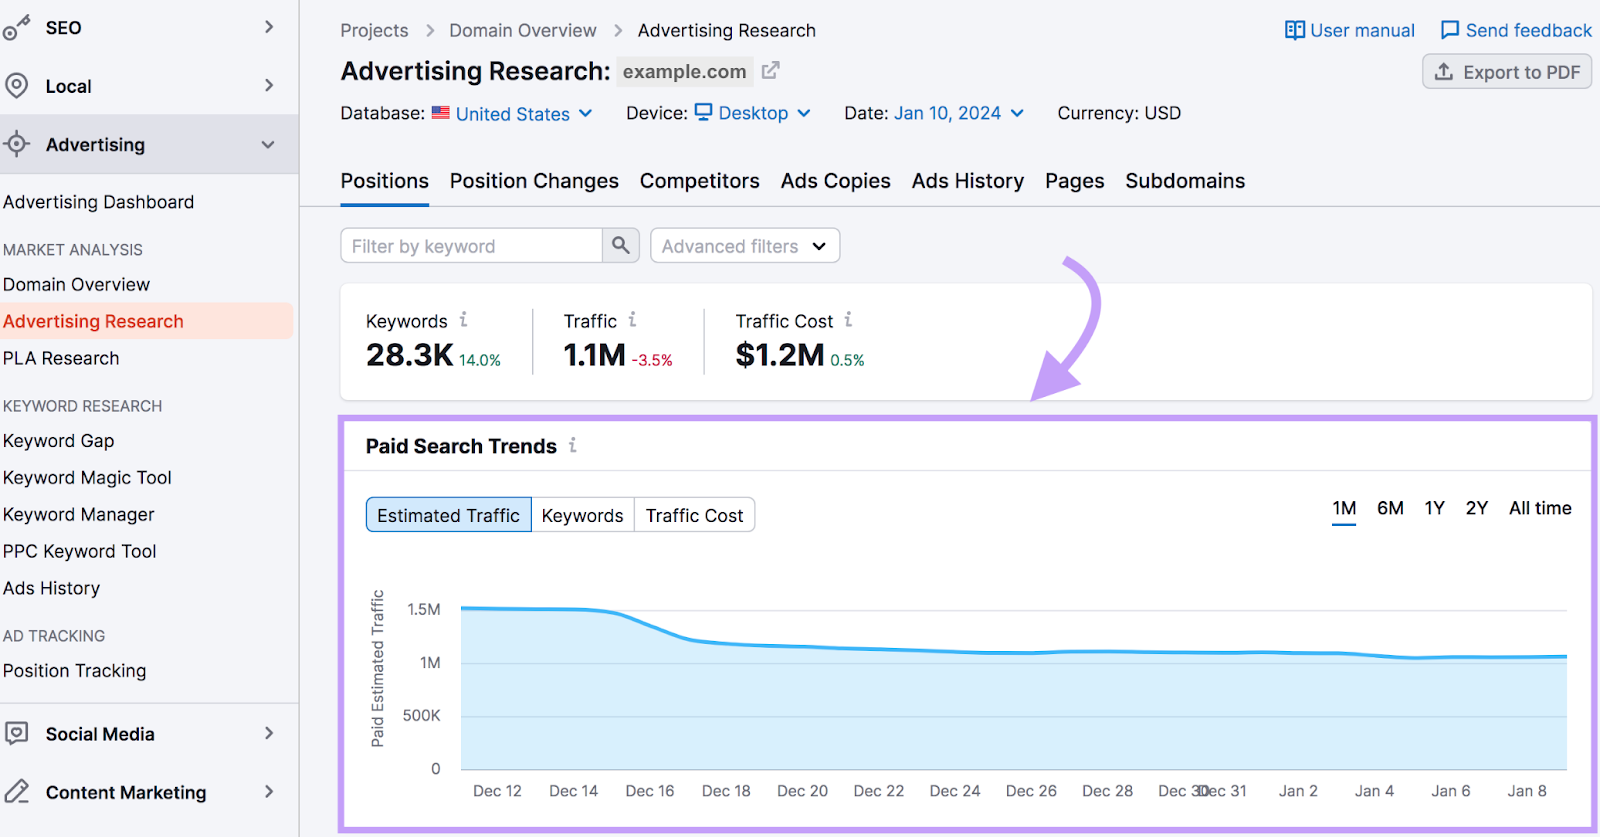 Advertising Research report showing changes in paid search traffic